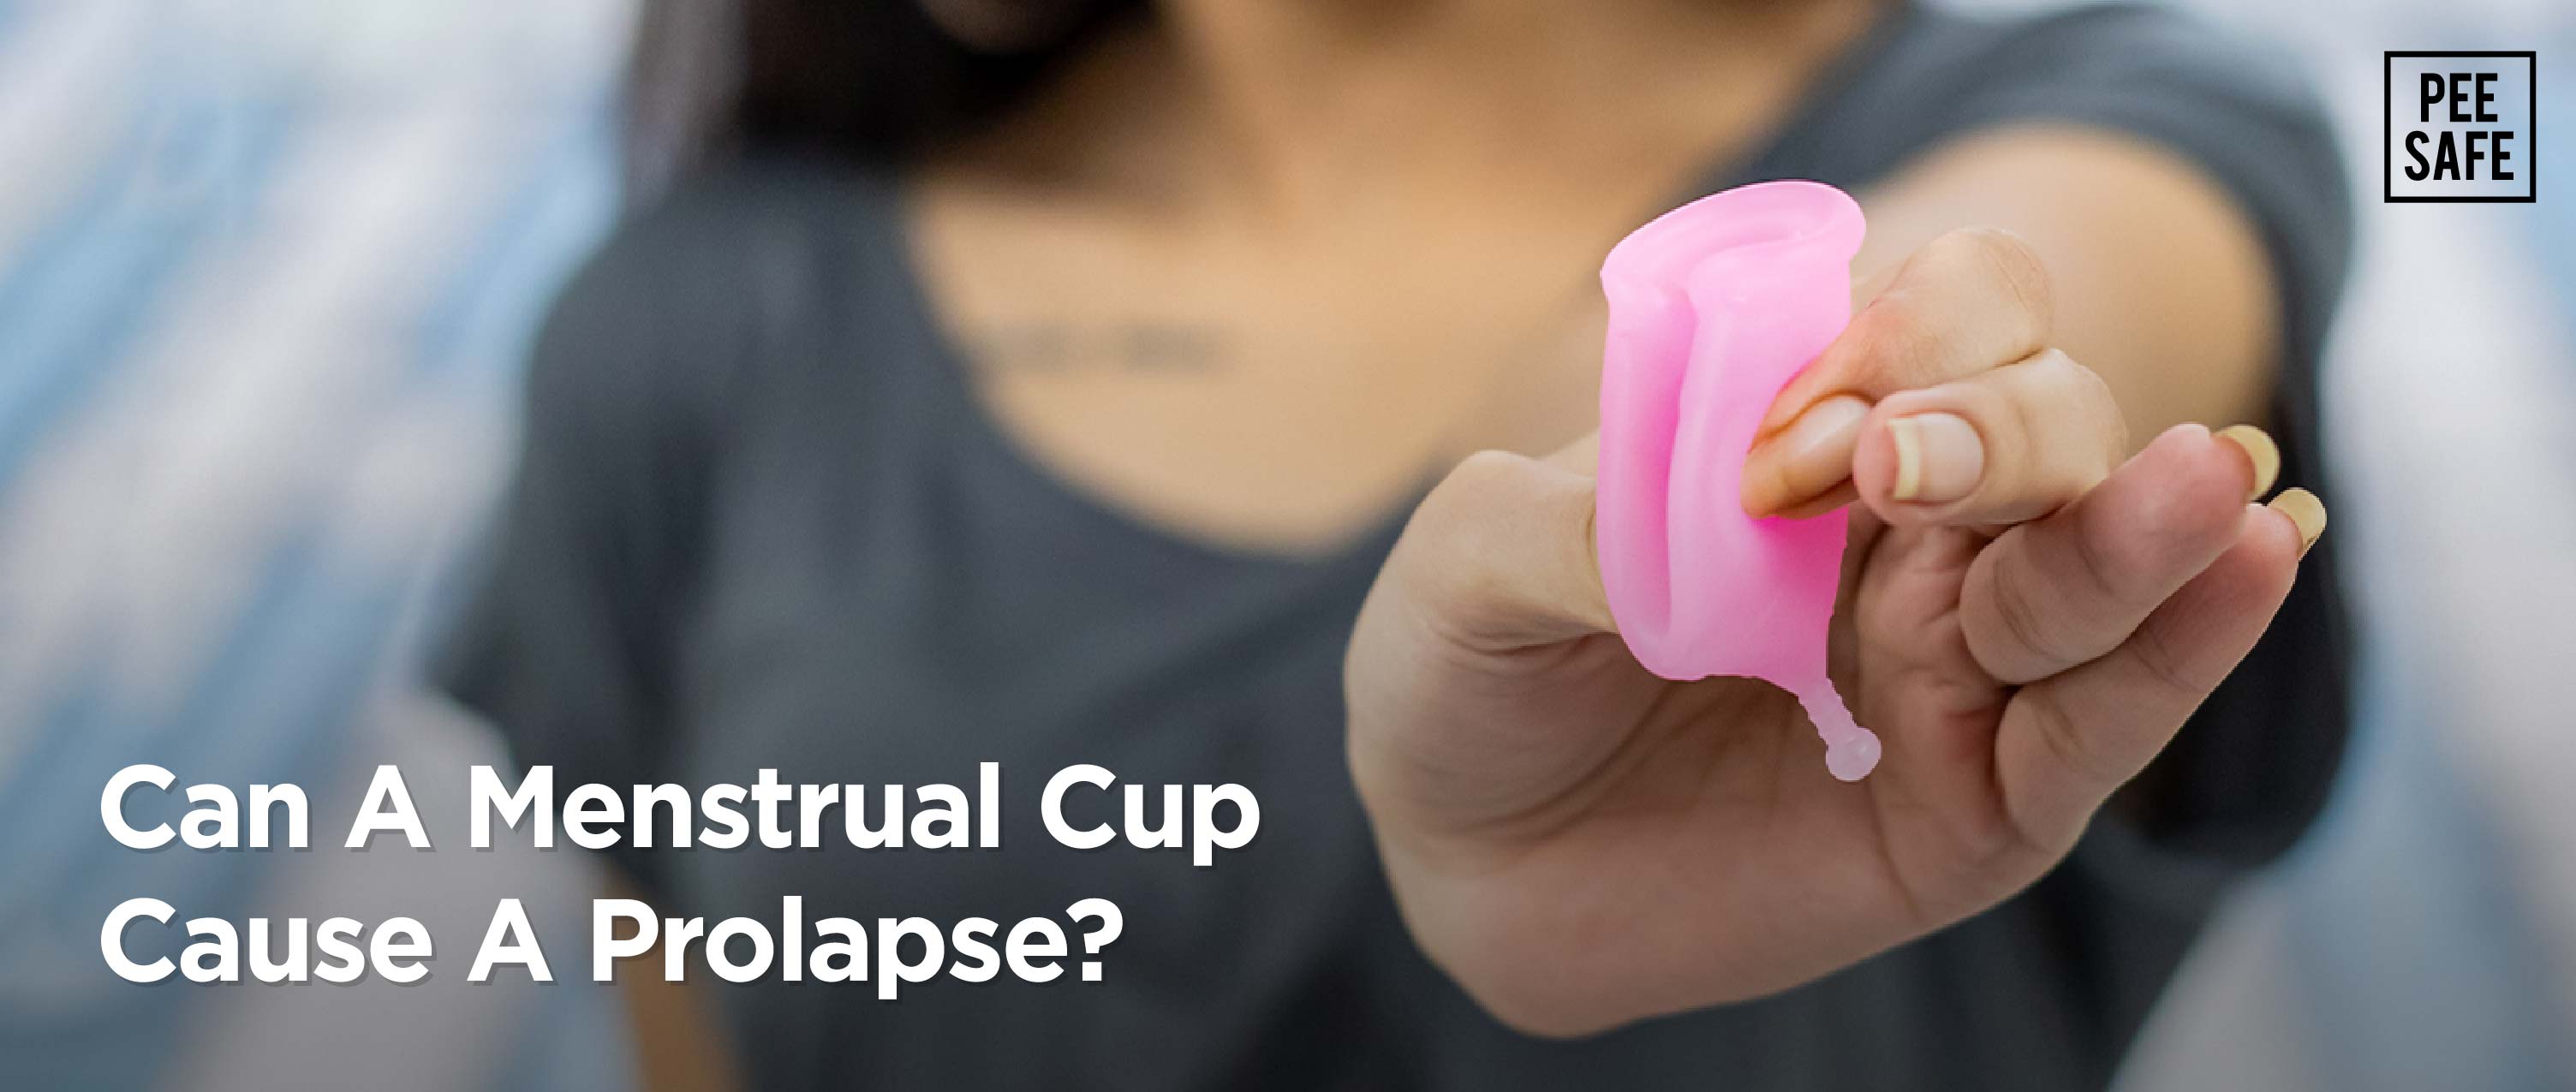 Can A Menstrual Cup Cause A Prolapse